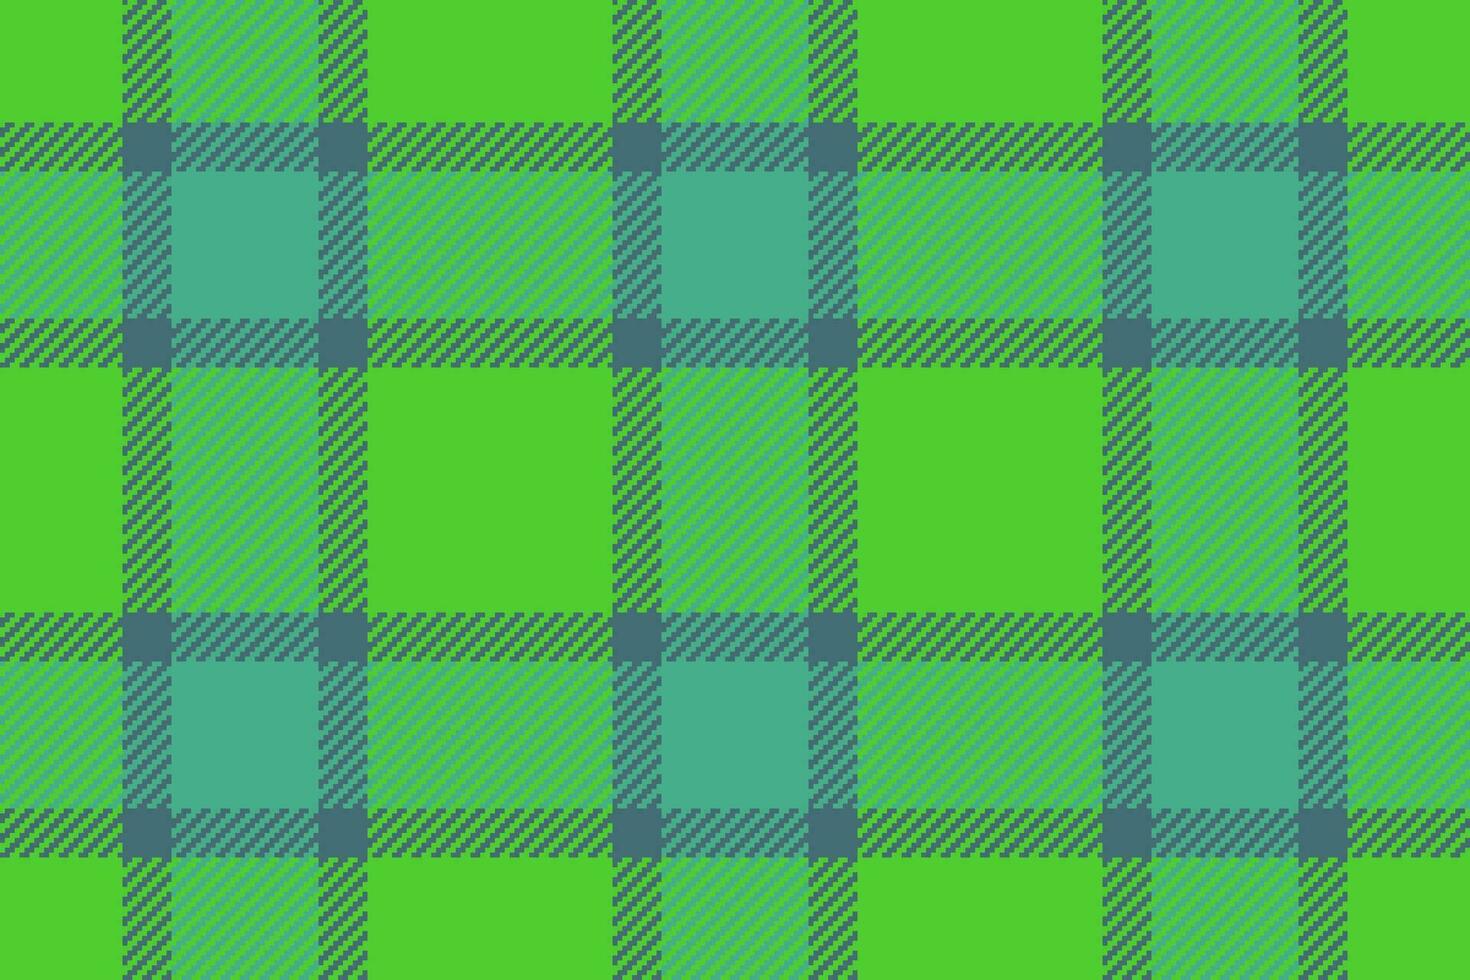 Background seamless textile of vector check tartan with a pattern texture plaid fabric.